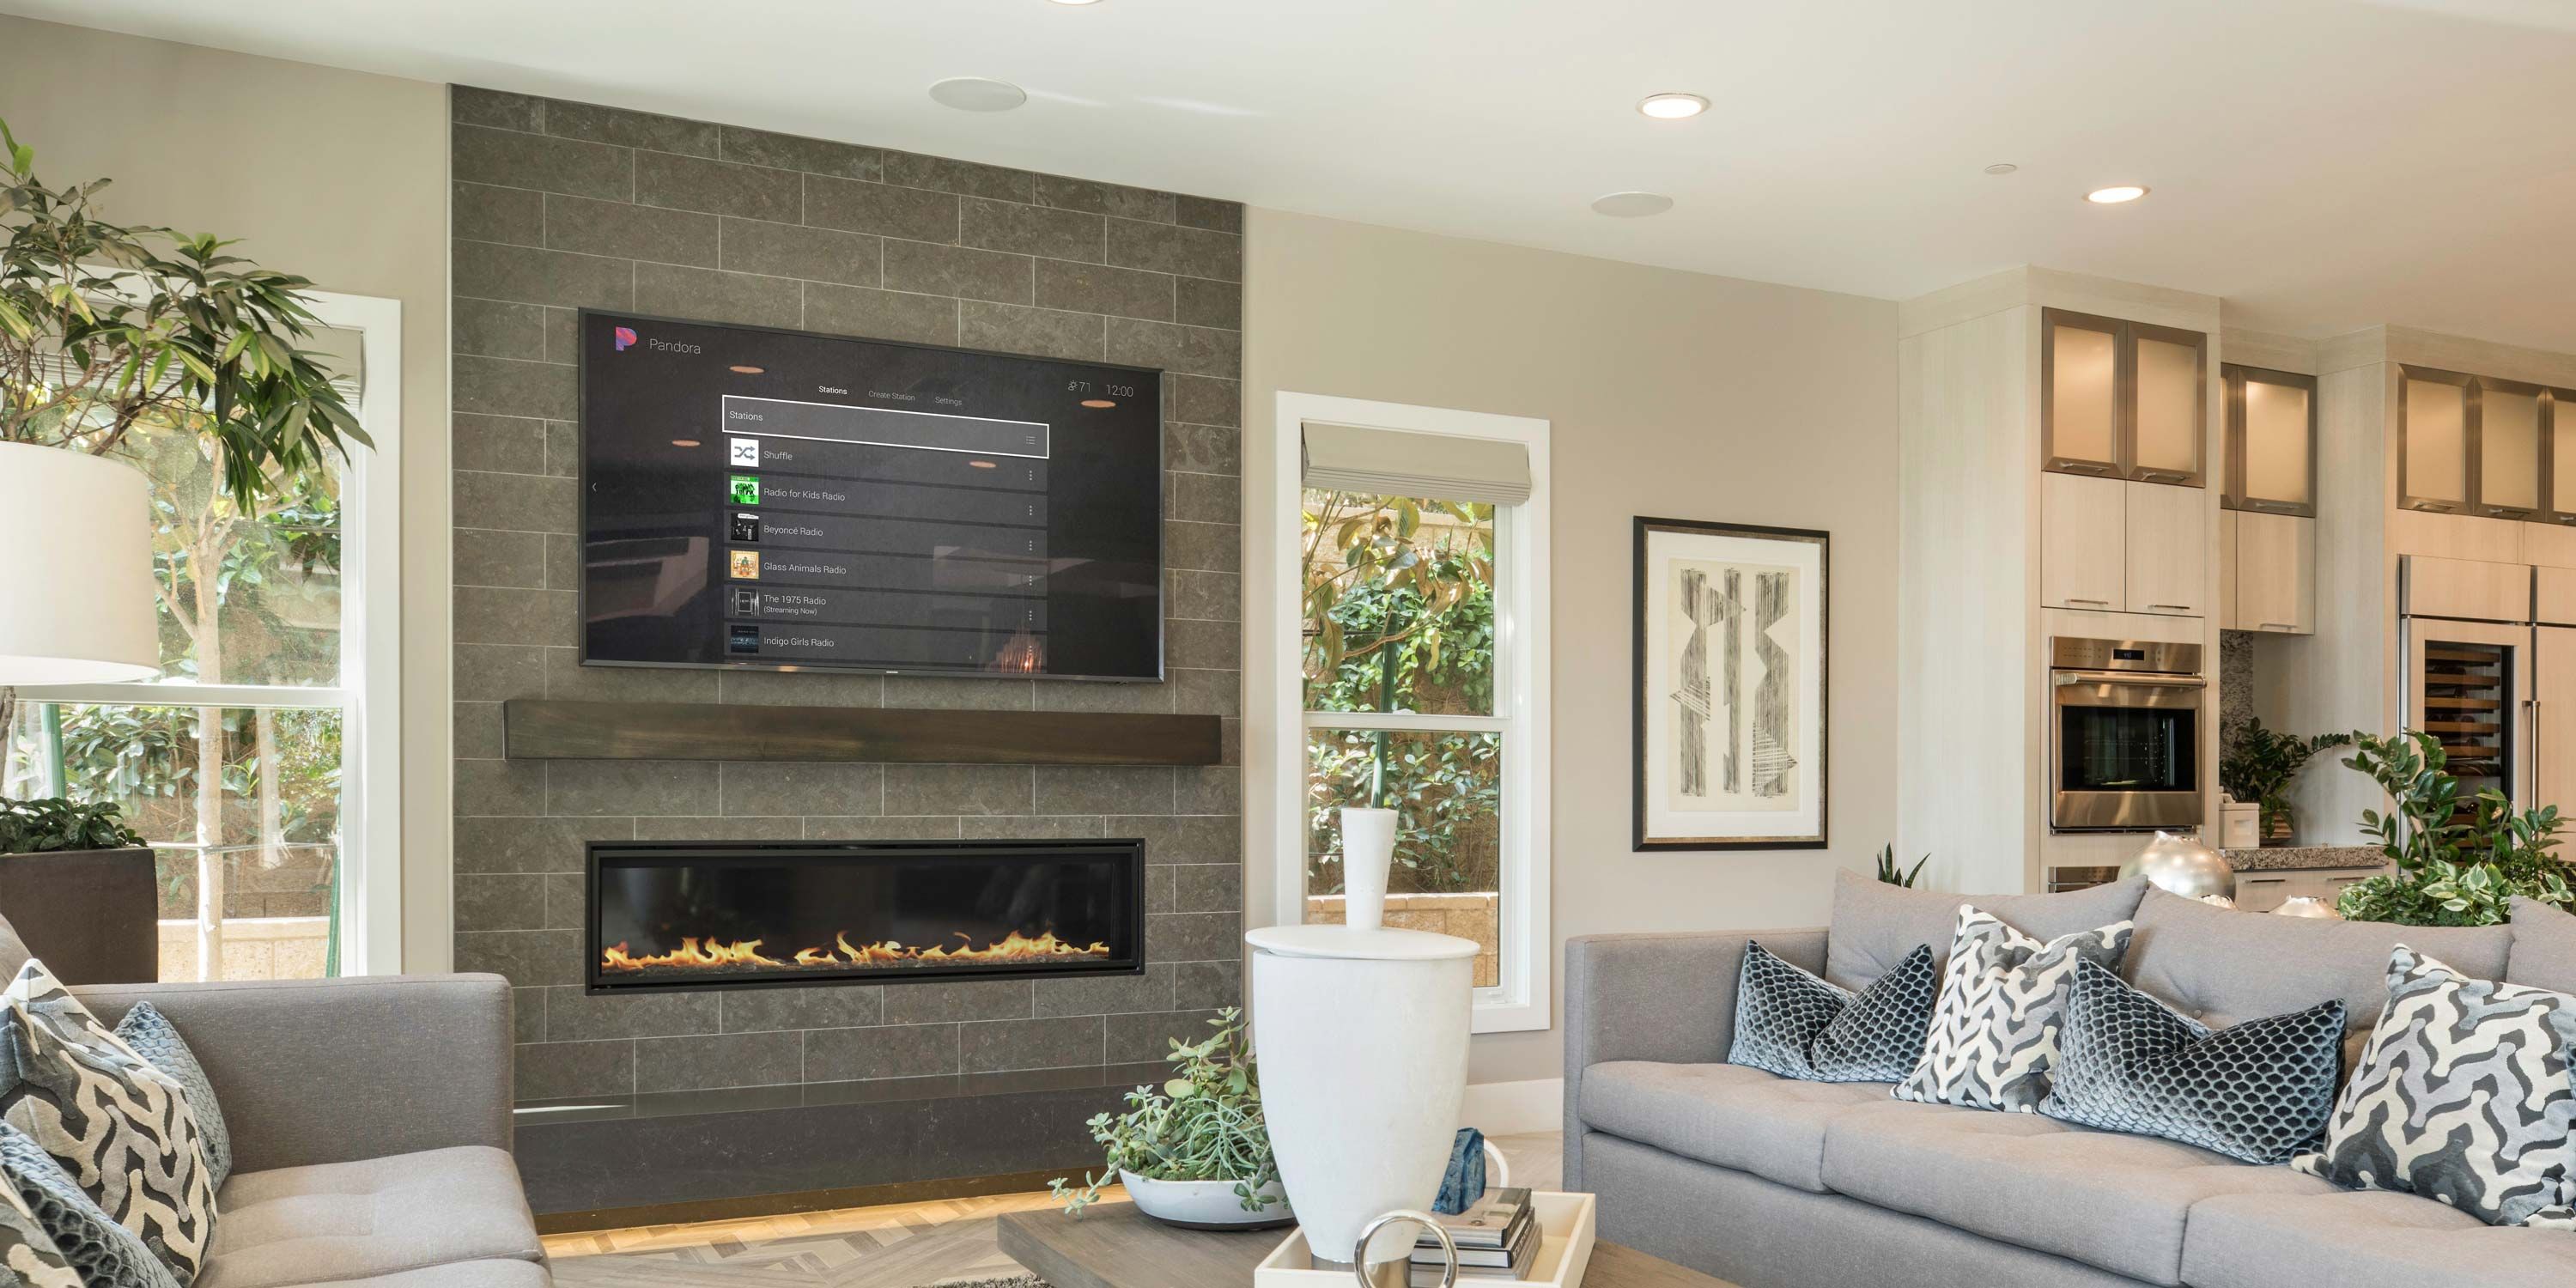 family room with a fireplace and tv with Control4 interface